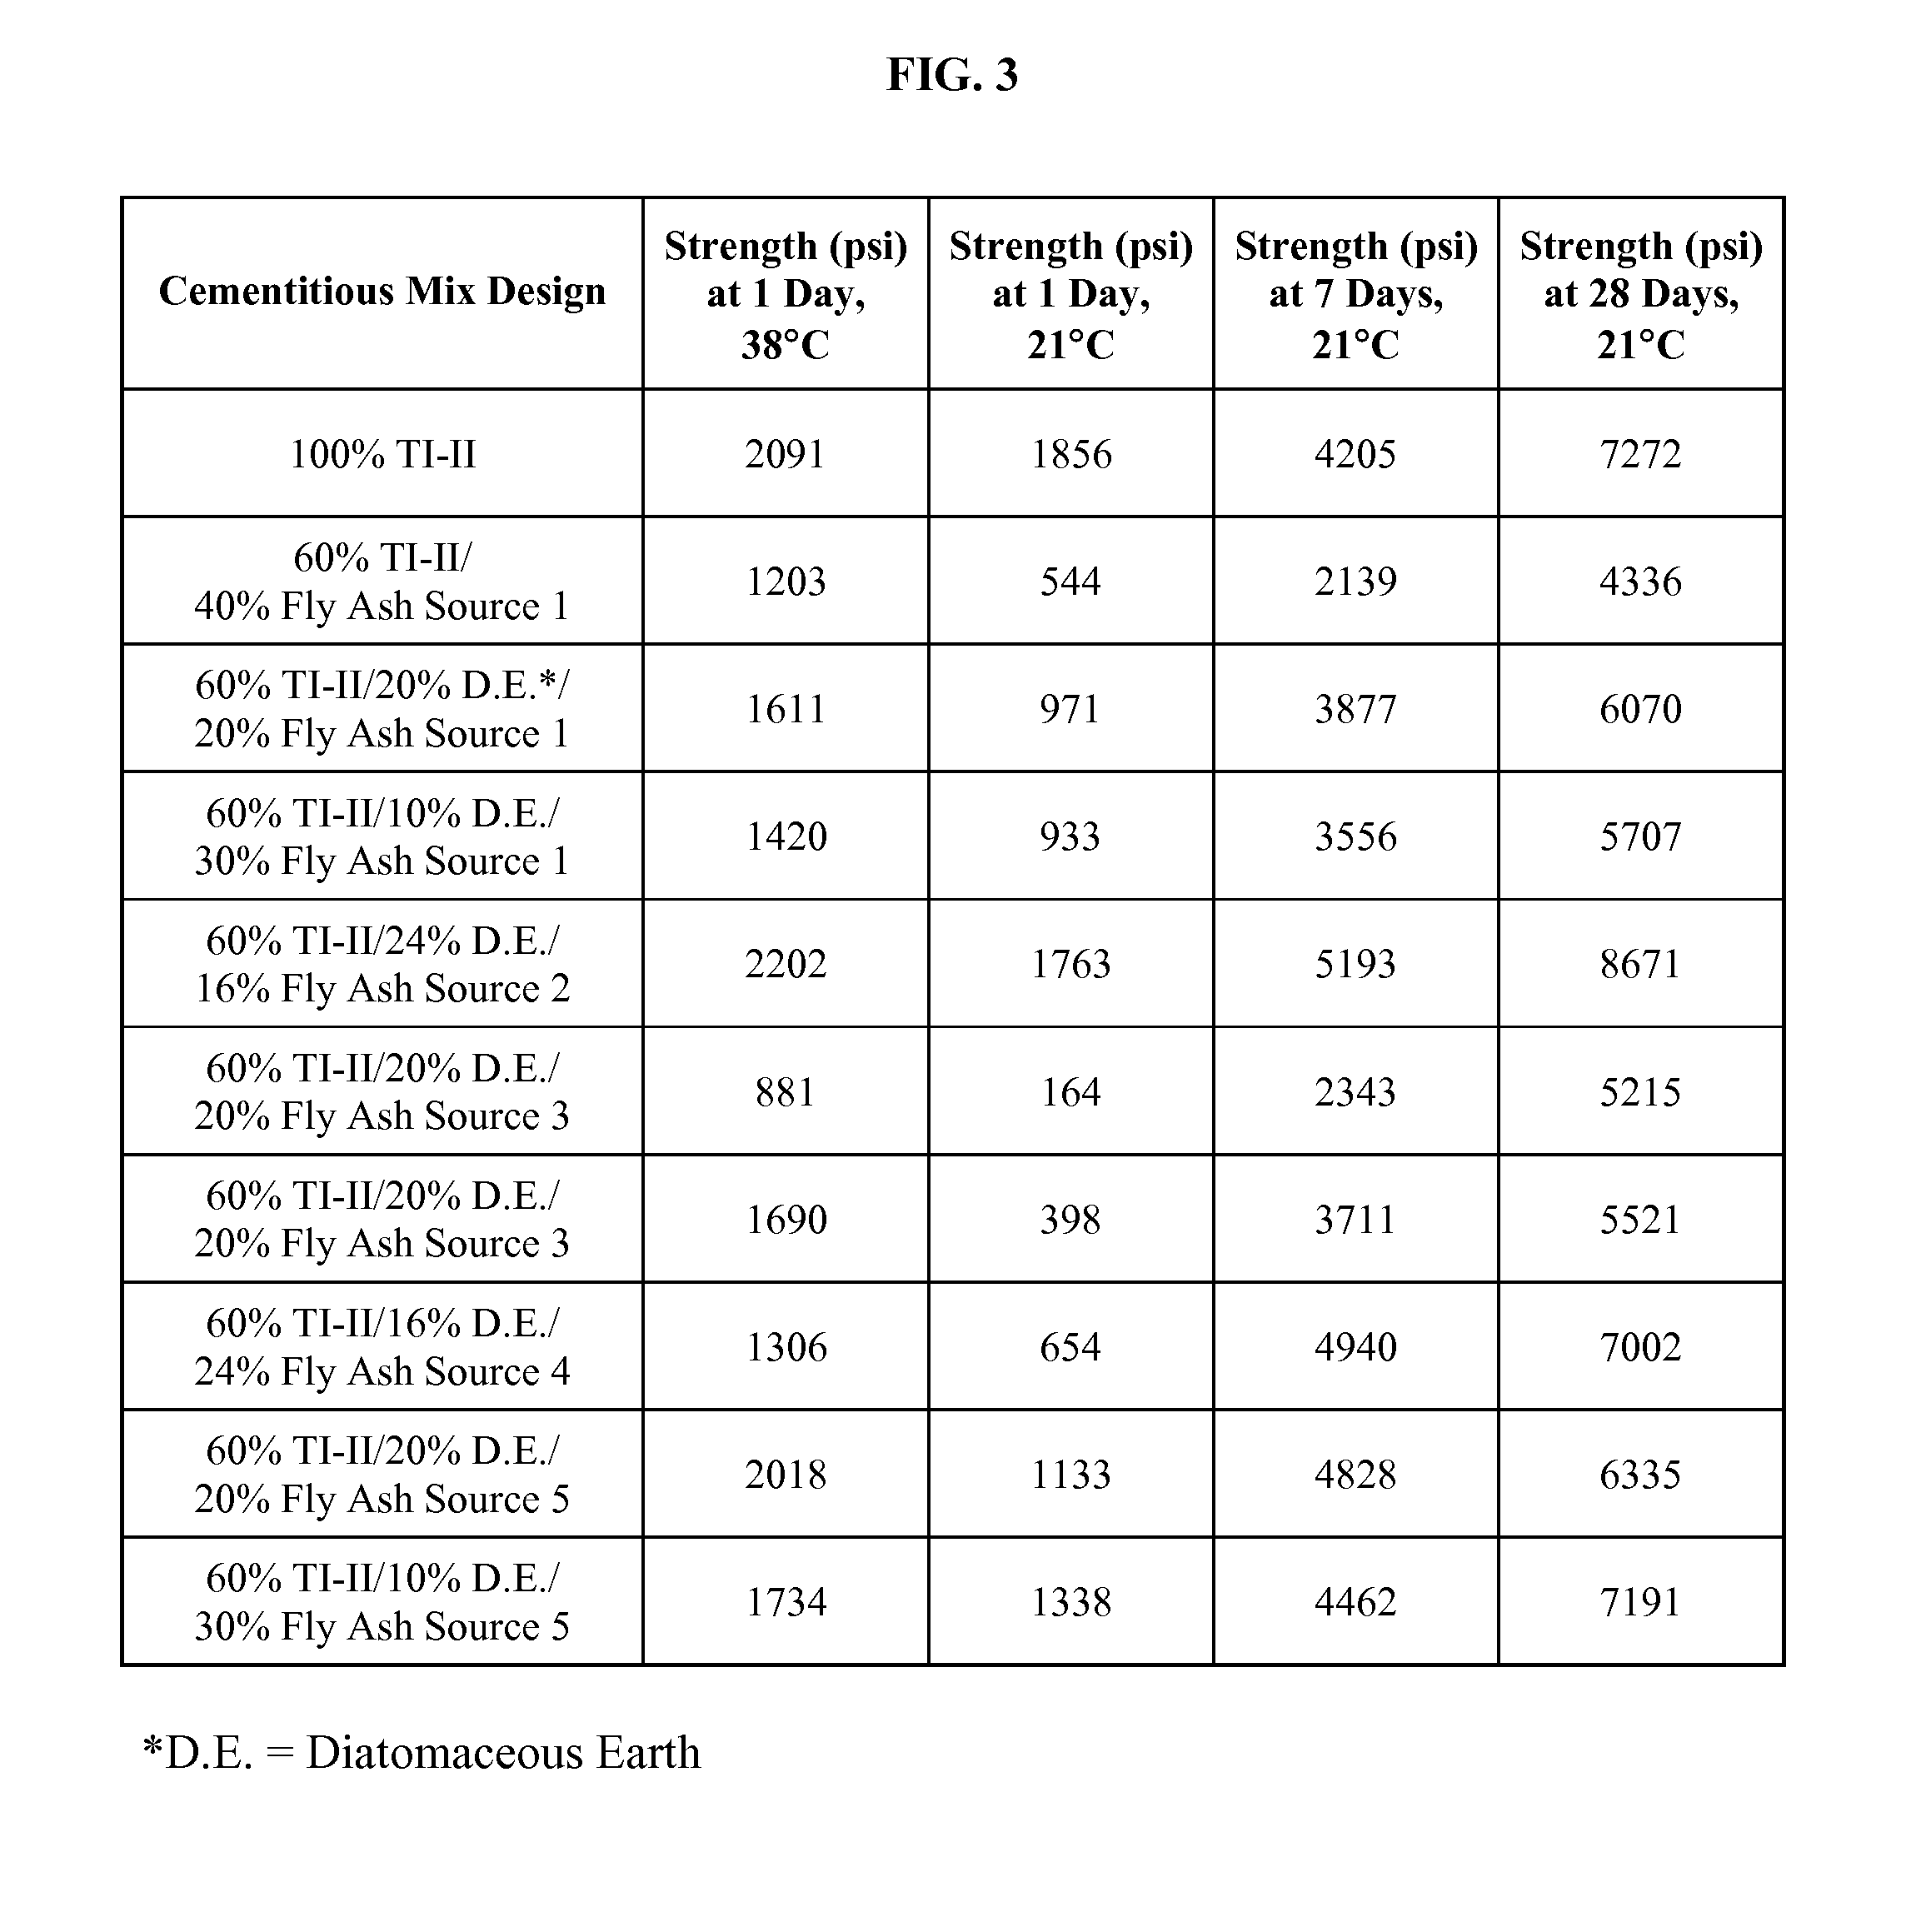 Pozzolanic compositions containing fly ash and remediation agents for use in cementitious materials